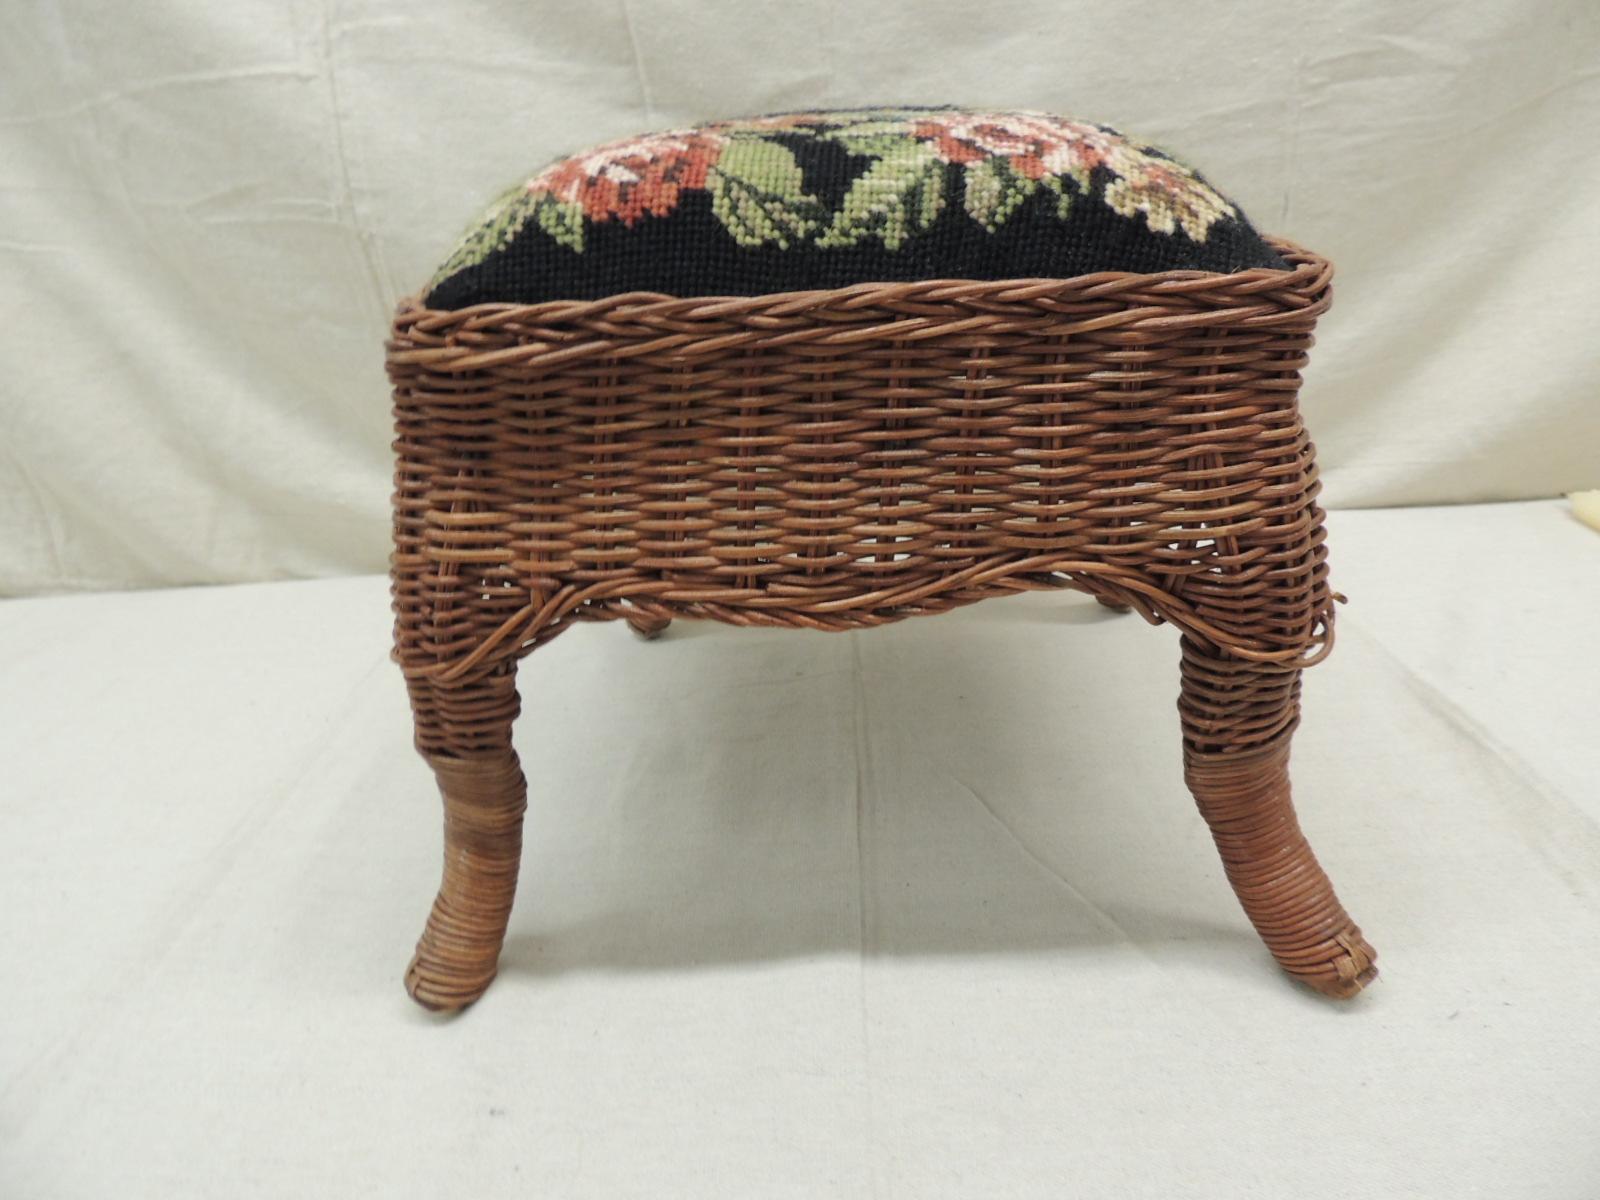 American Vintage Footstool with Antique Style Needlepoint Tapestry